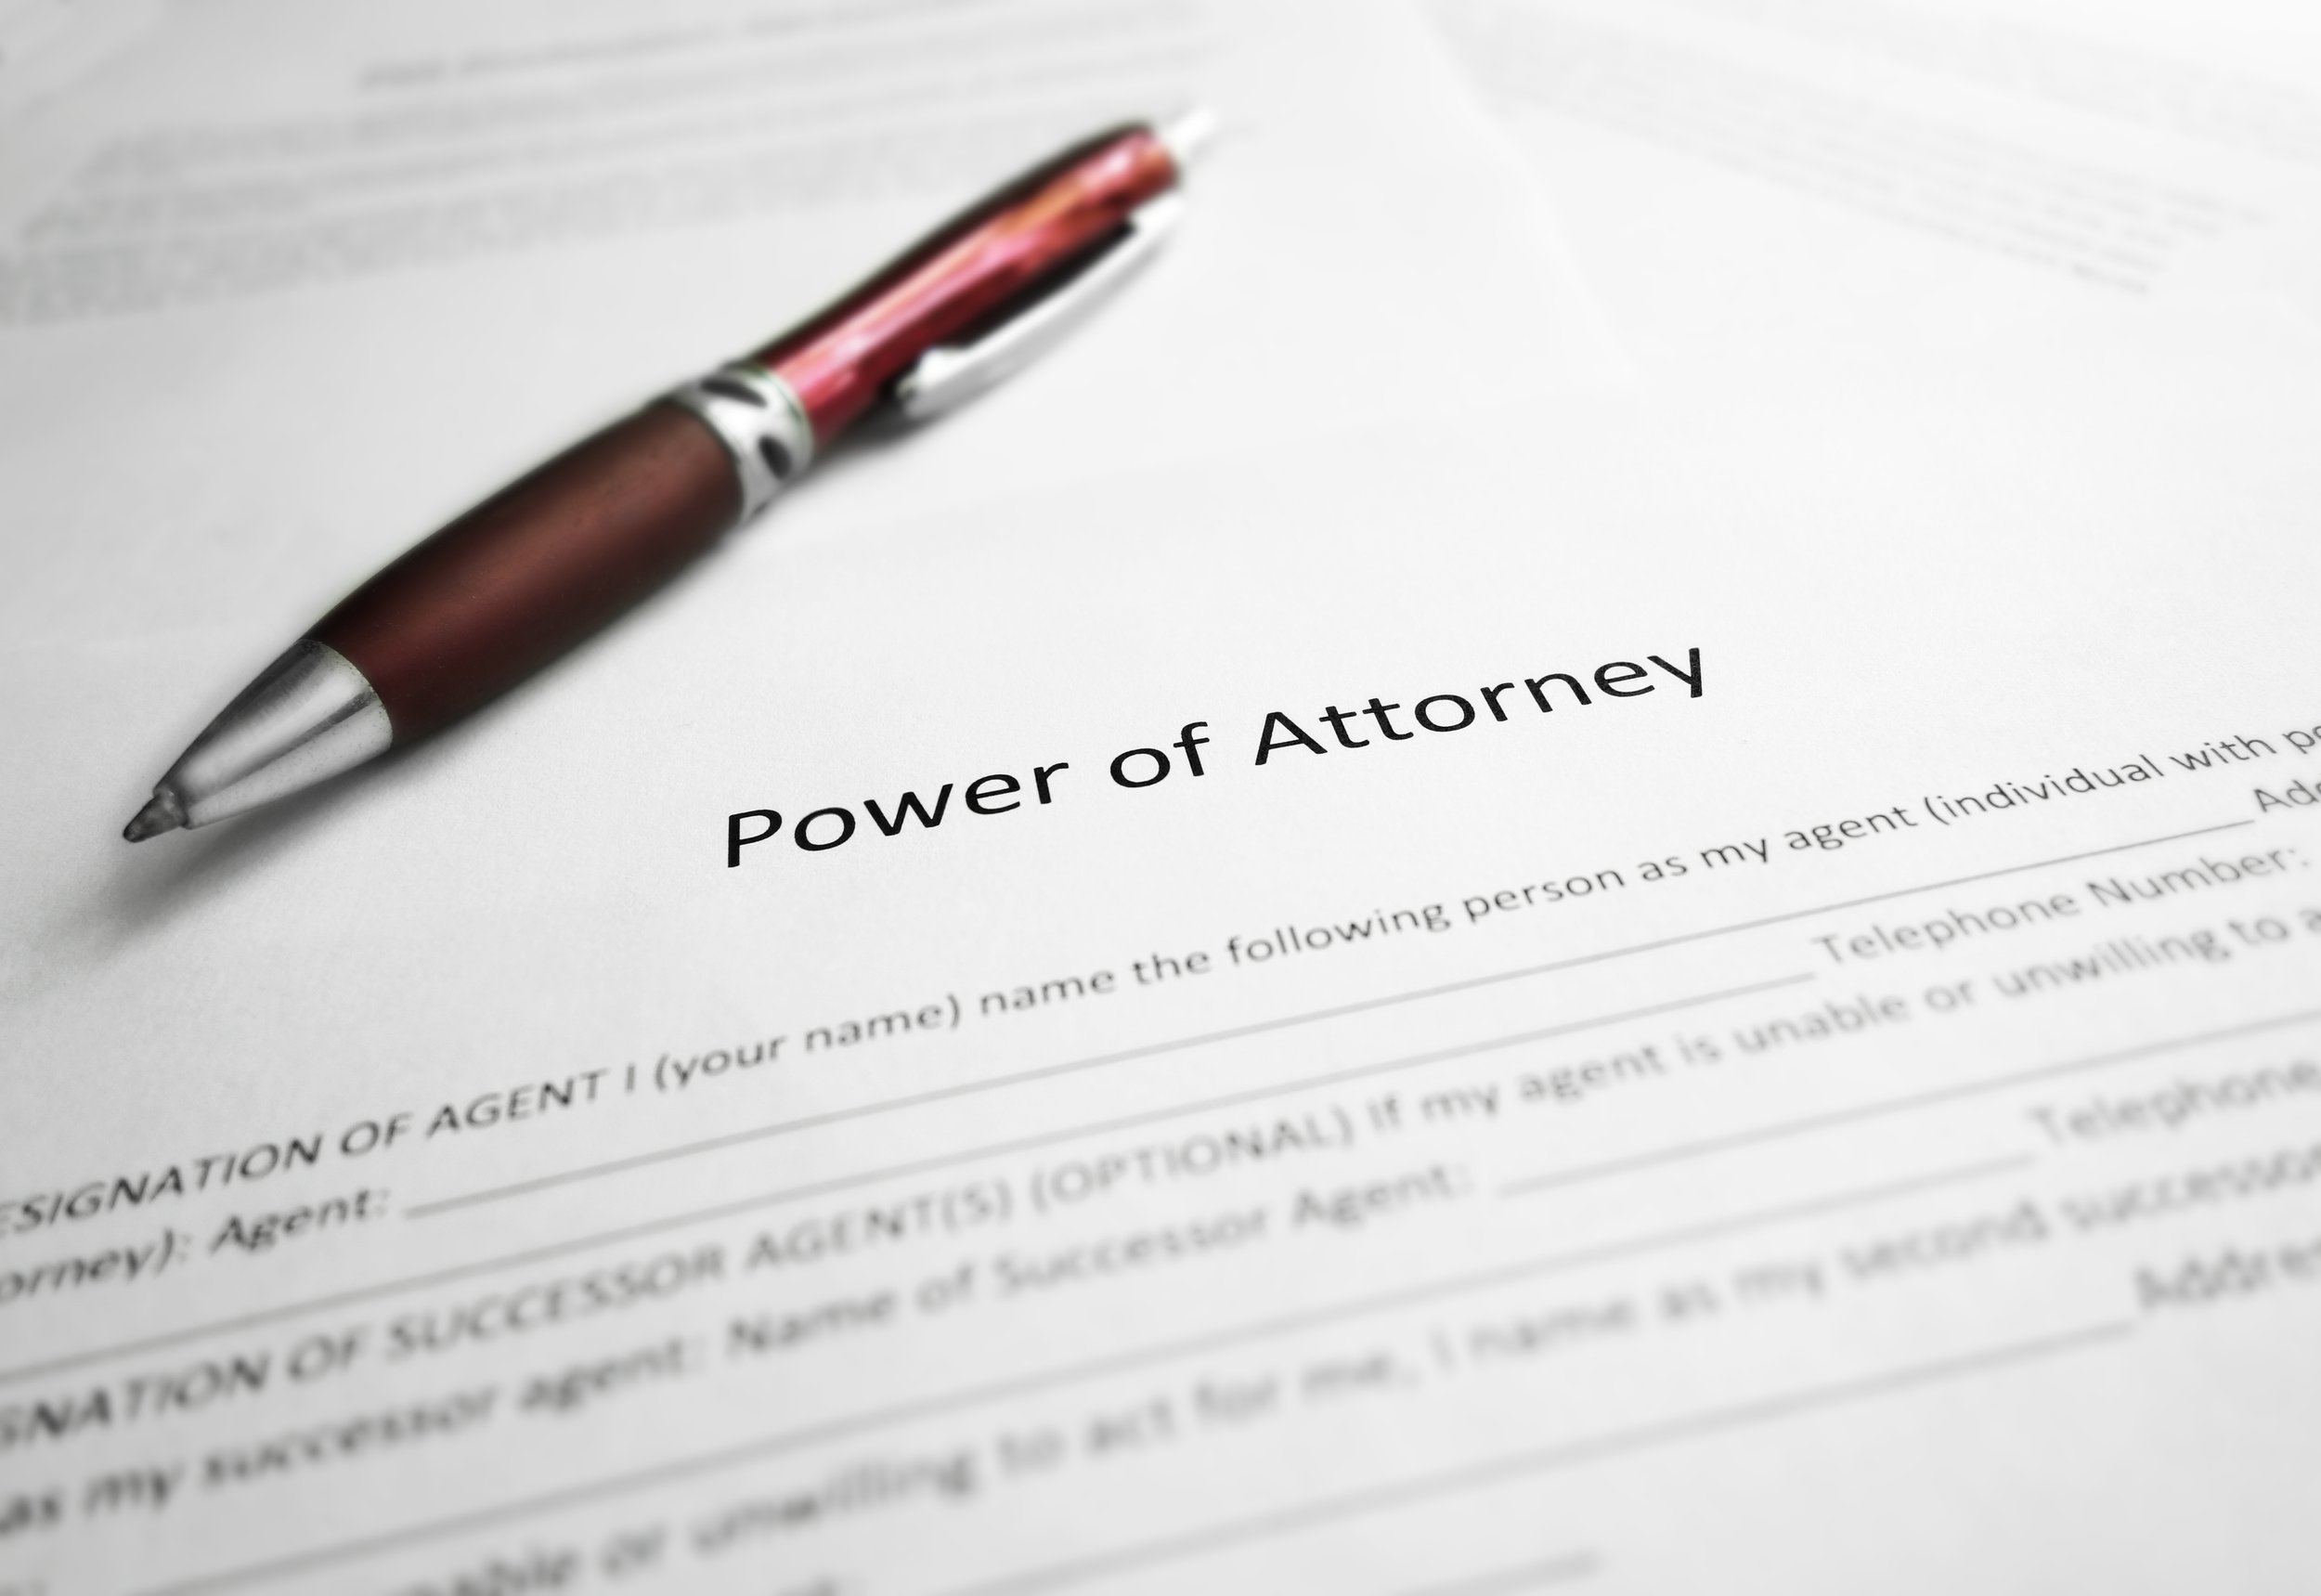 Power-of-Attorney-paper-839379648_3809x2619.jpeg